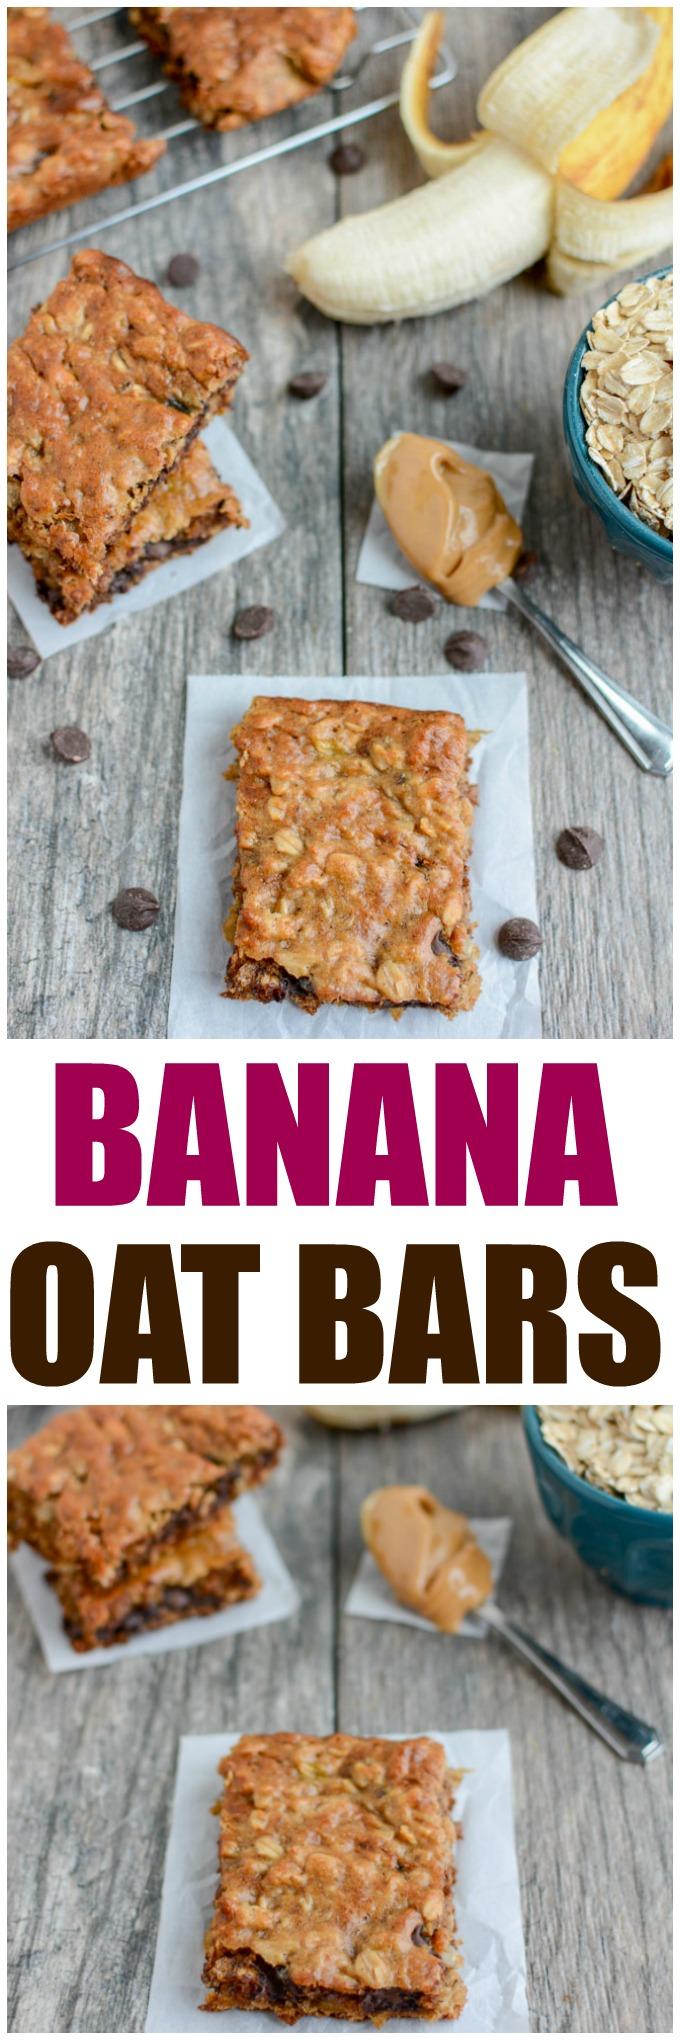 These Easy Banana Oat Bars are gluten-free, dairy-free, kid-friendly and make the perfect snack. Grab the kids and try this recipe today!